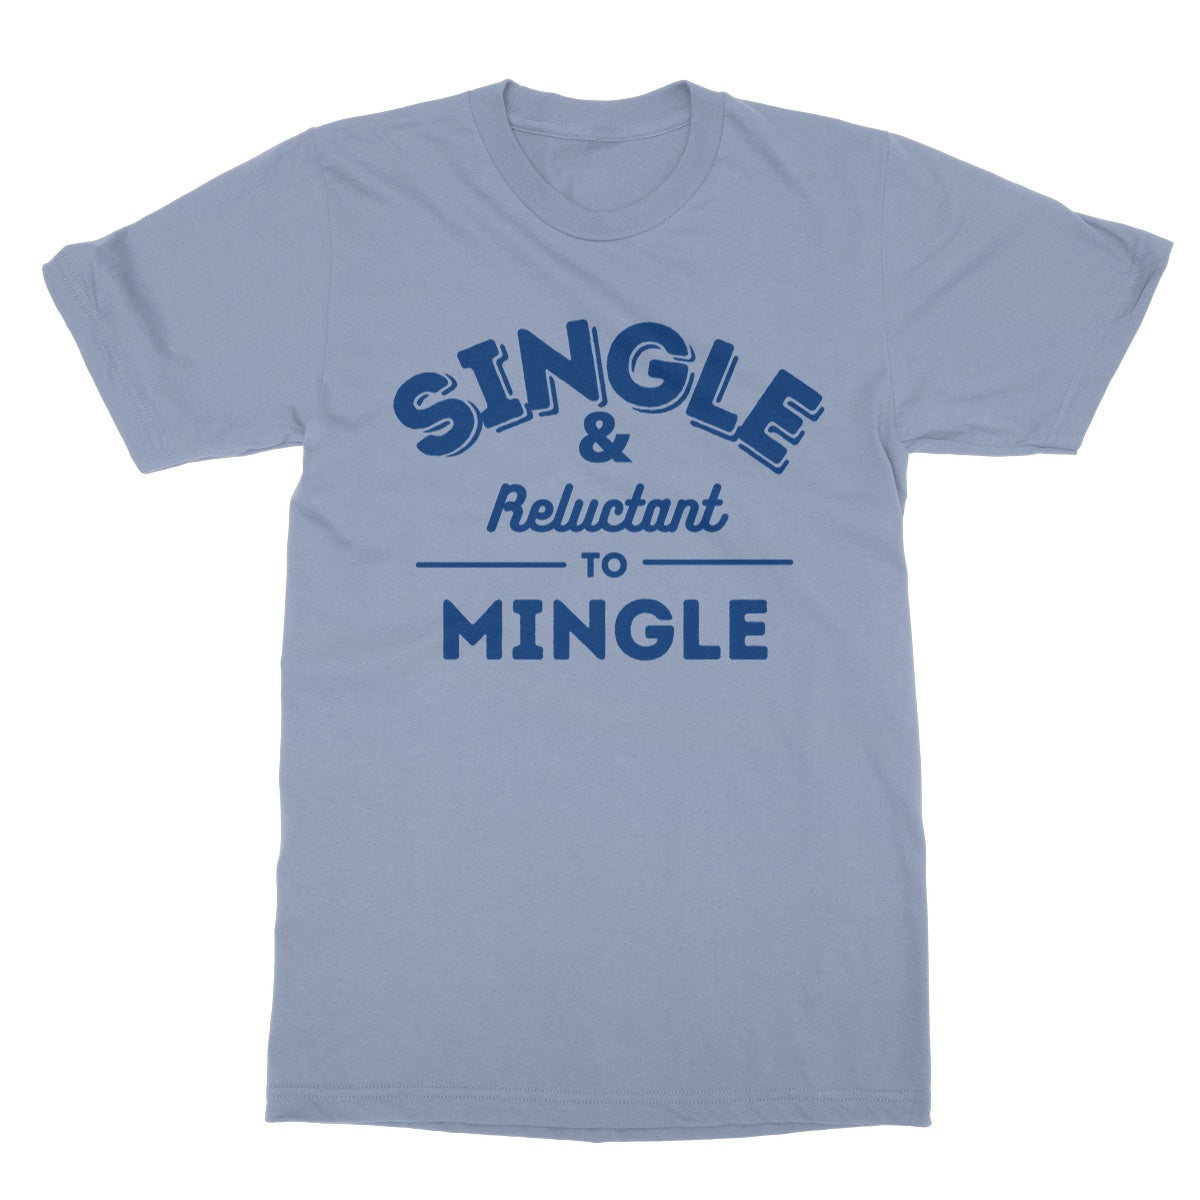 single and reluctant to mingle t shirt blue